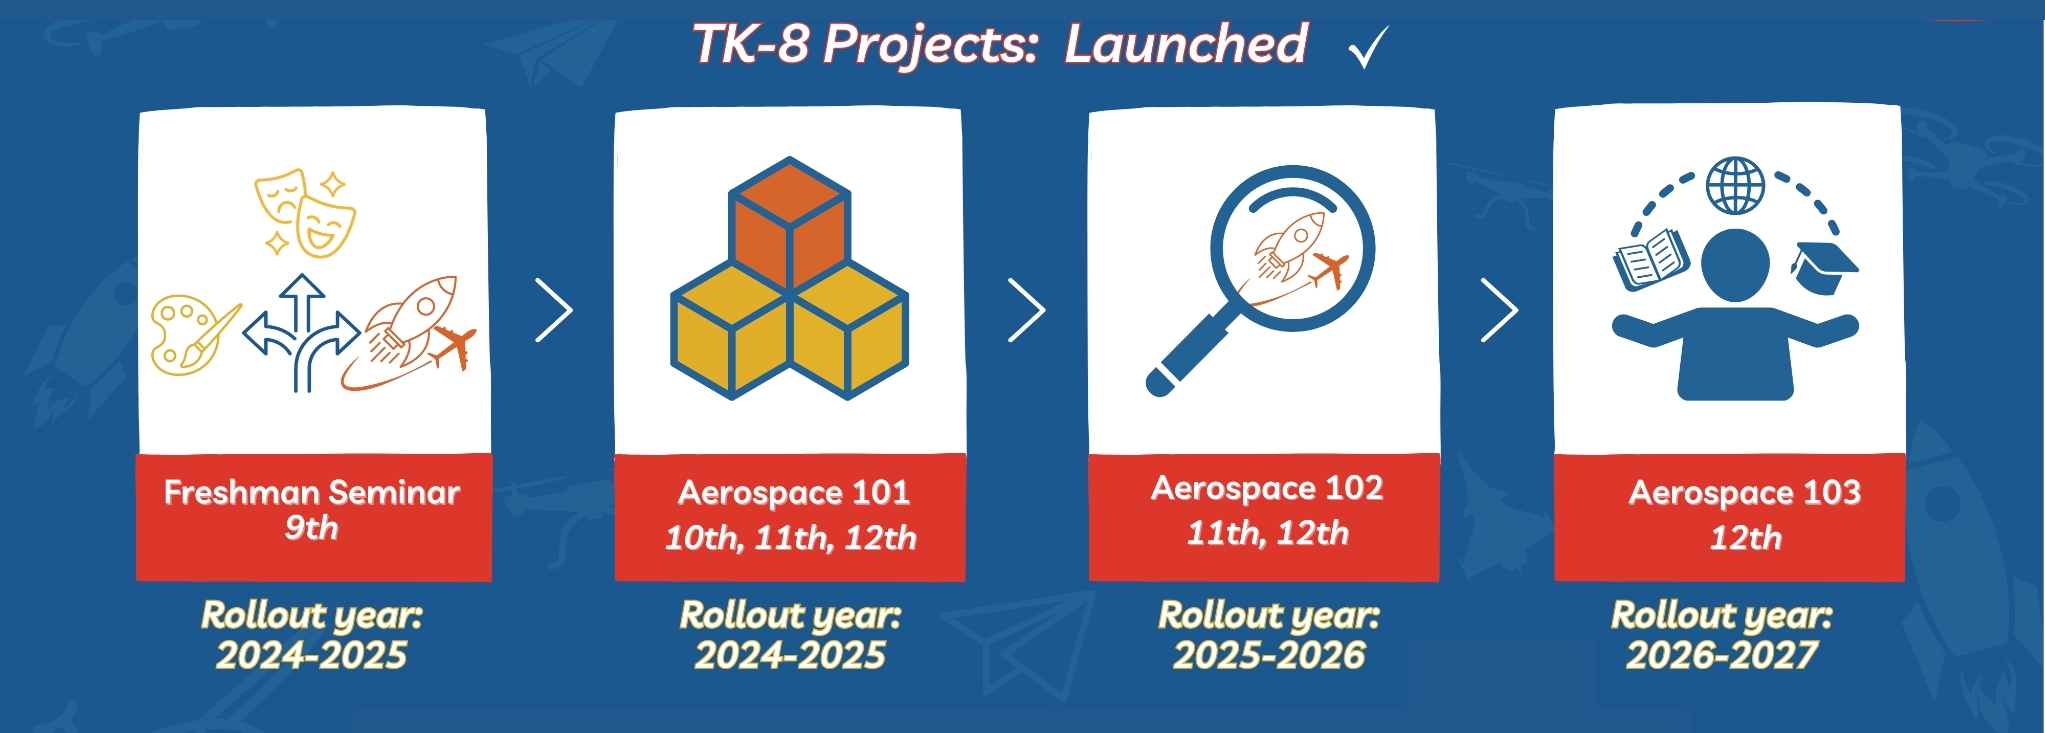 TK-8 Projects Launched SCV Aerospace CCL Pathway